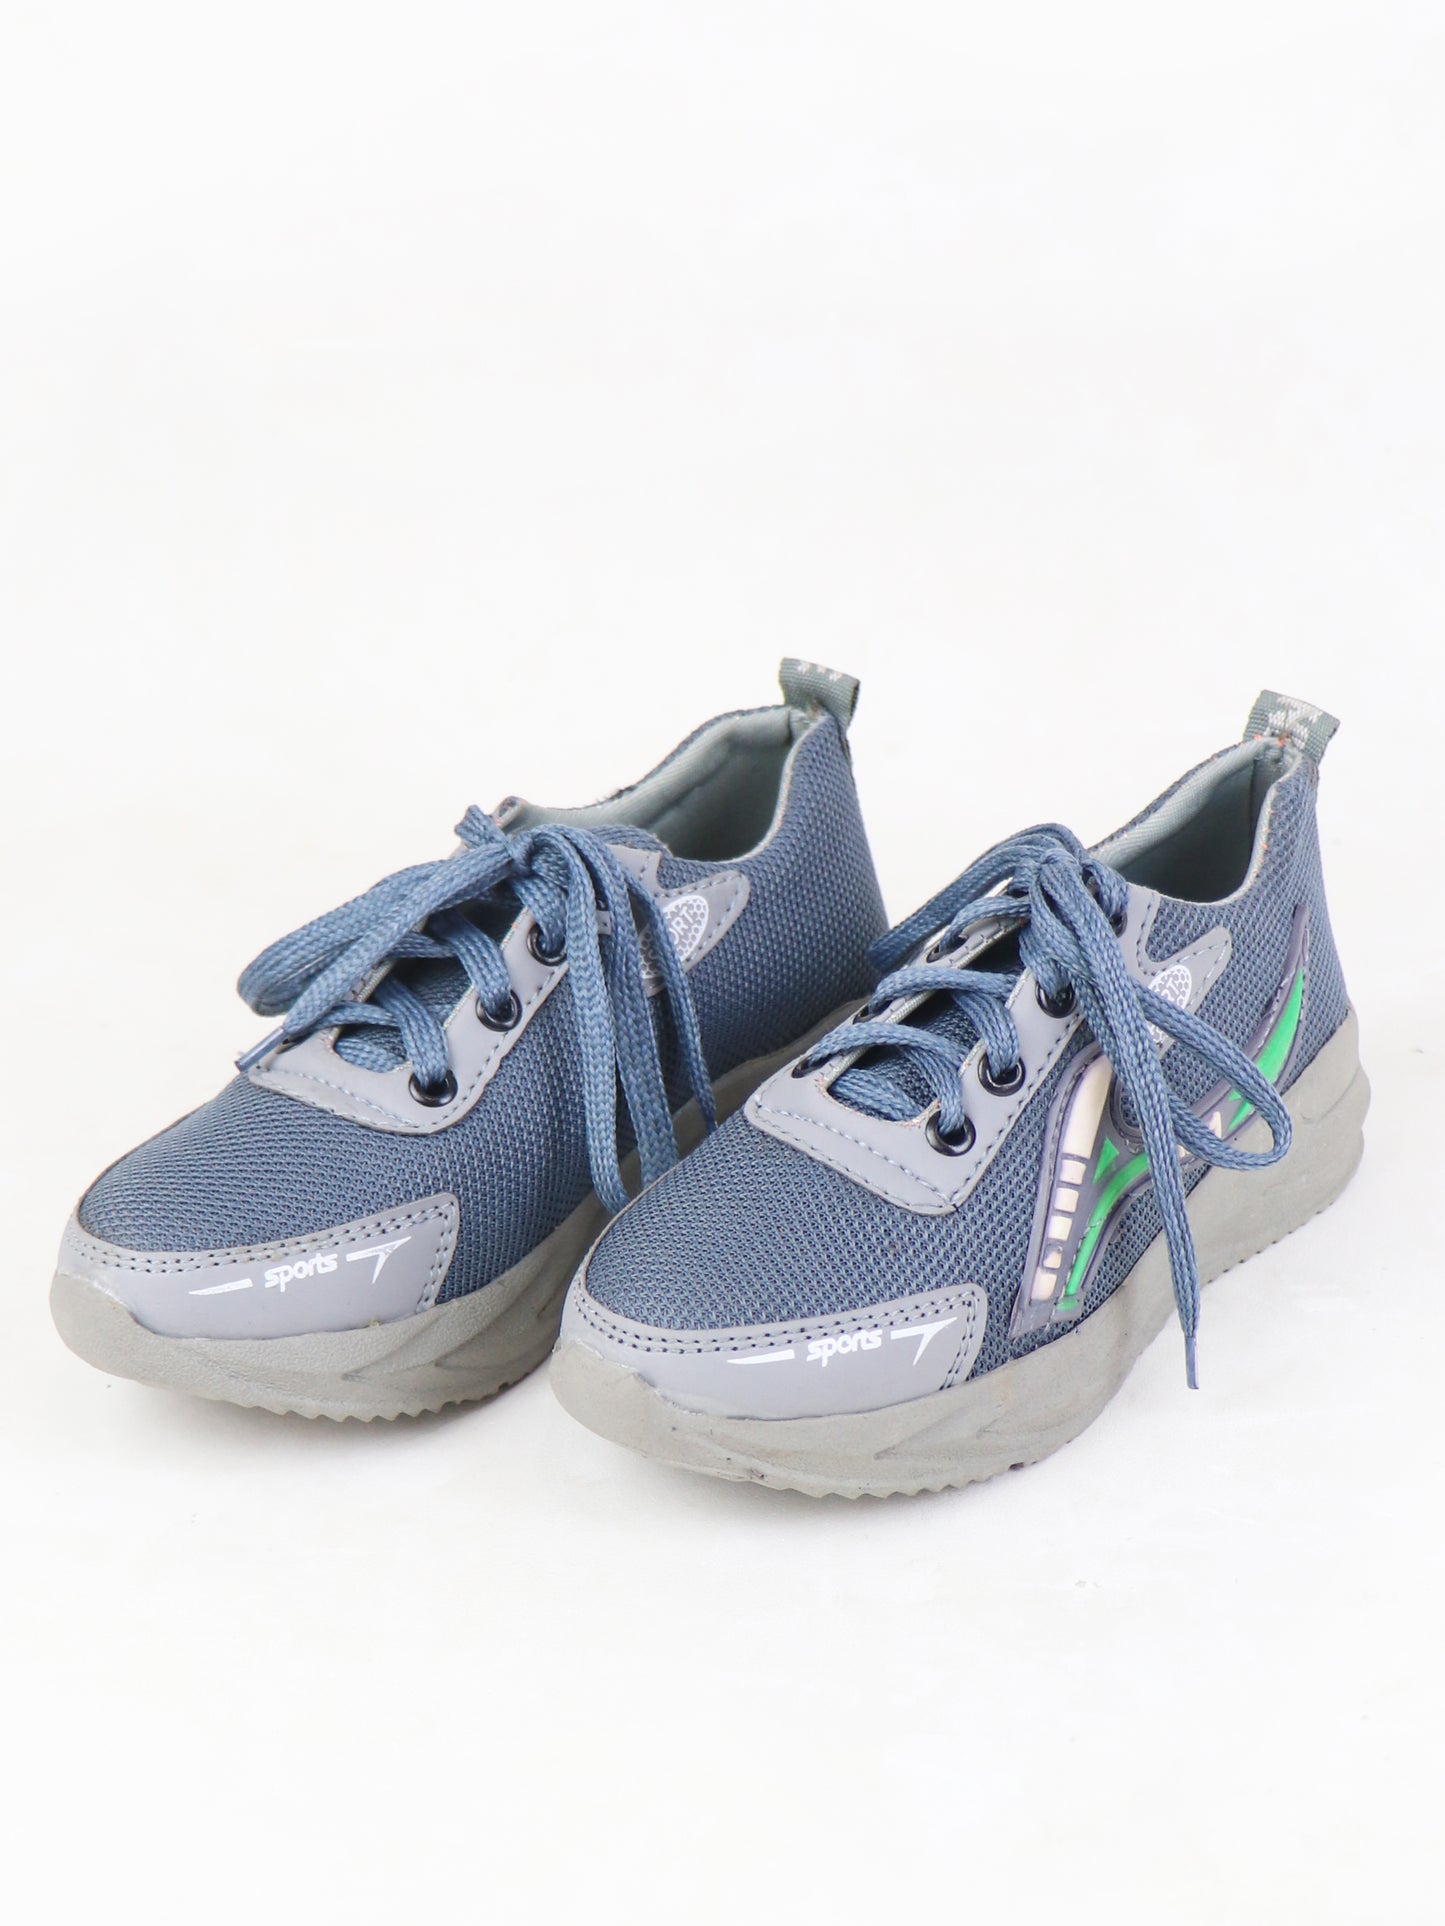 BS54 Boys Lace Shoes 8Yrs - 12Yrs Grey